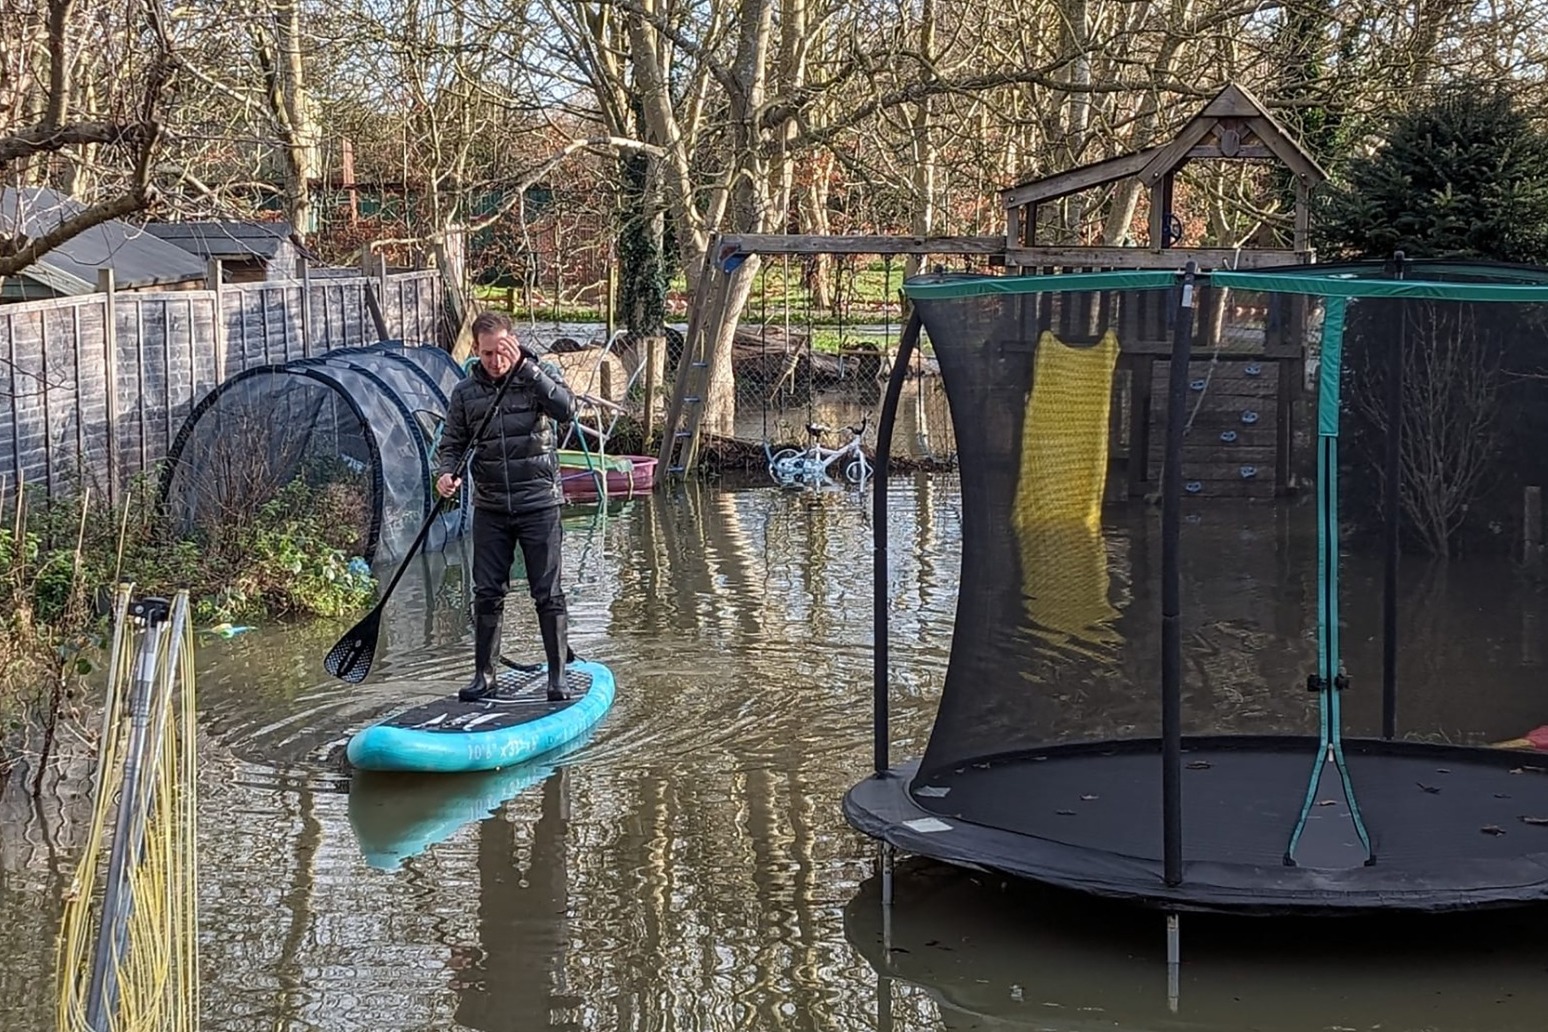 Maidenhead flooding: Gardens become lakes amid worries homes will be uninsurable 